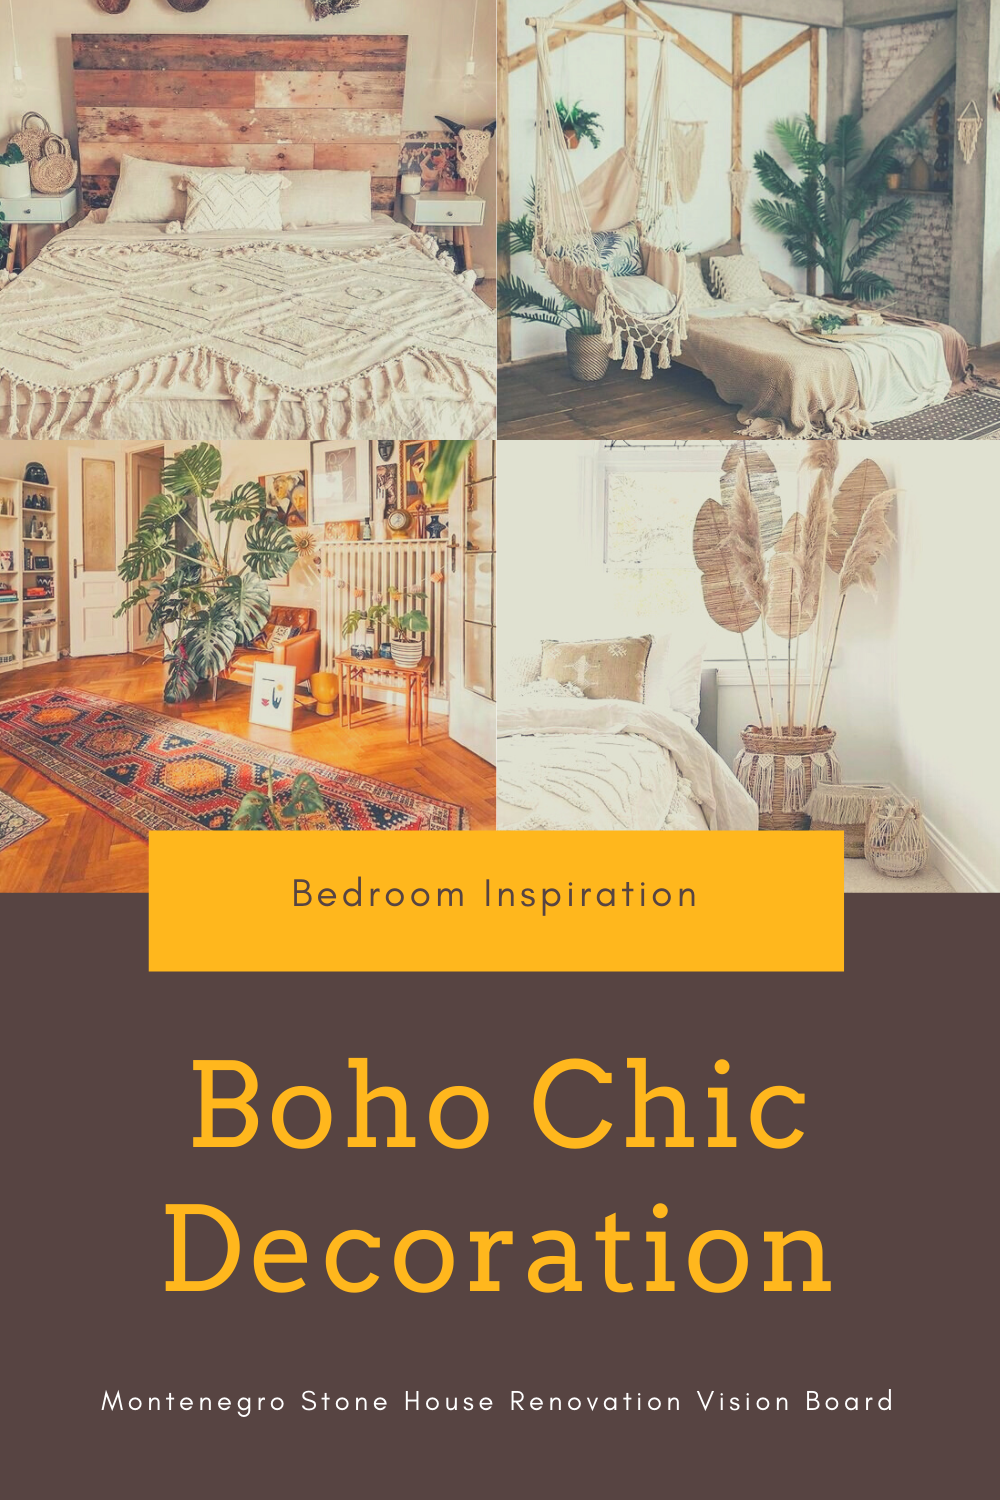 Bedroom Inspiration with Boho Chic Decoration1.png